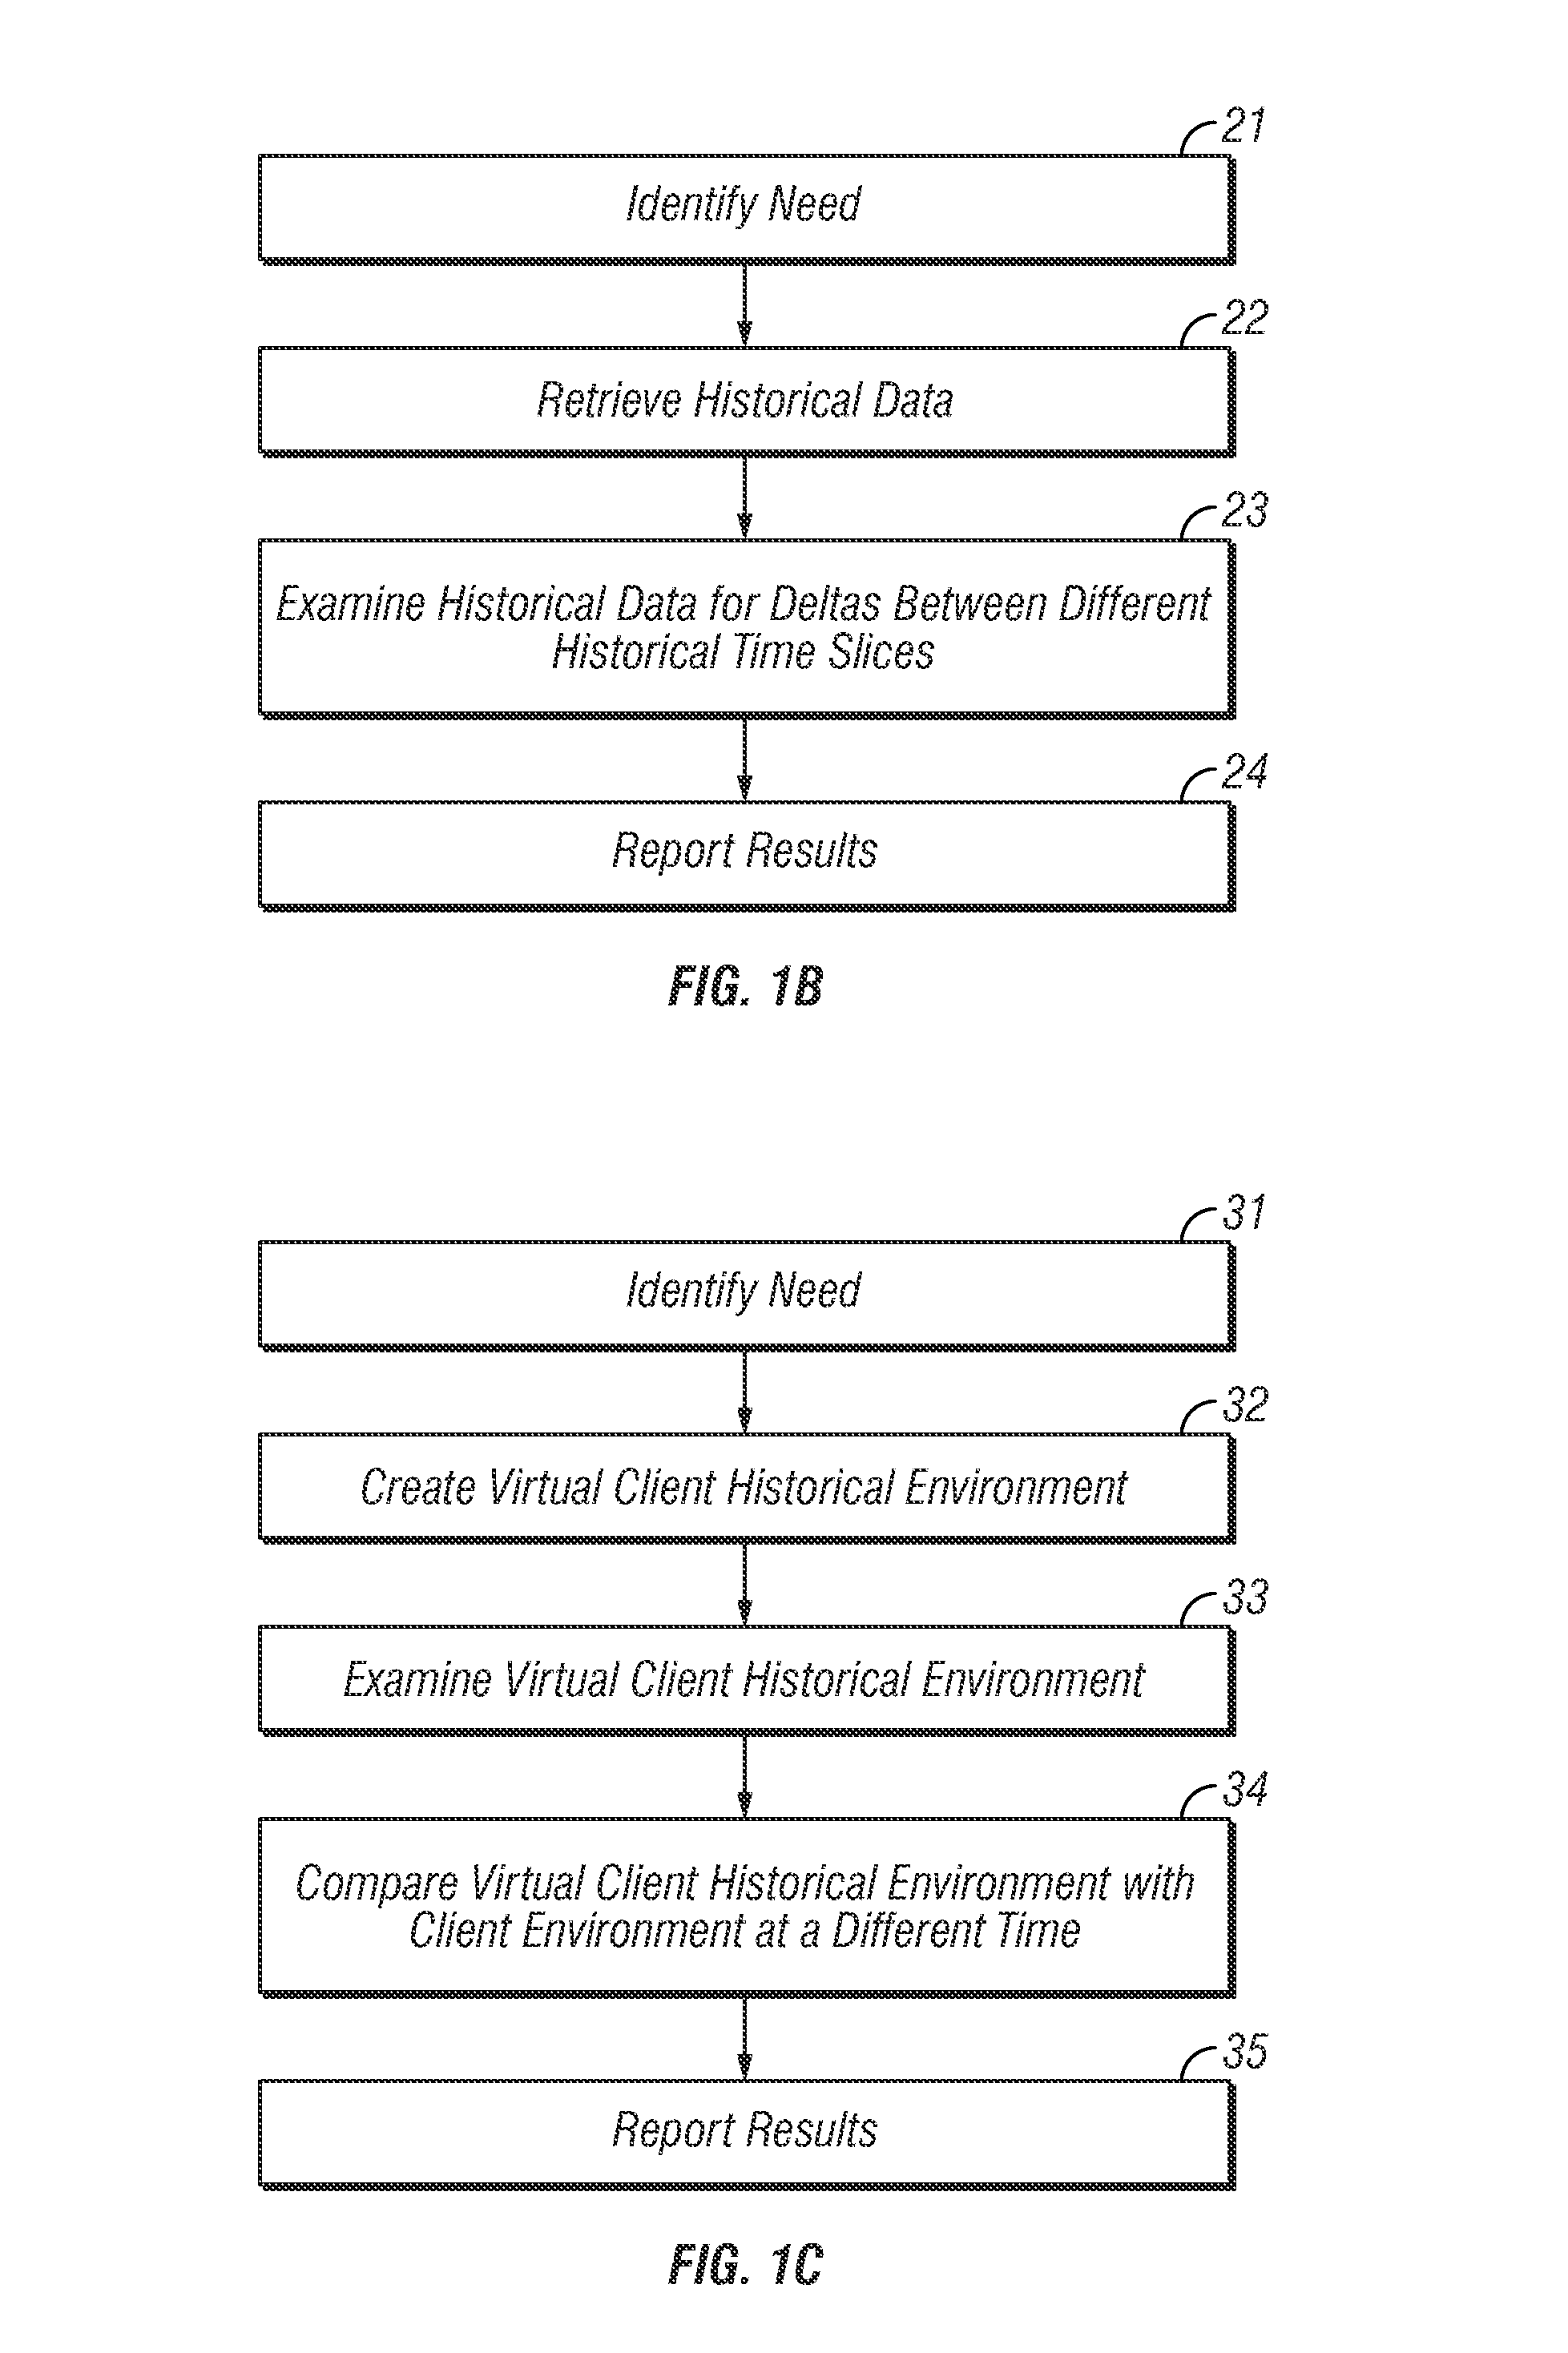 Method and apparatus for maintaining high data integrity and for providing a secure audit for fraud prevention and detection